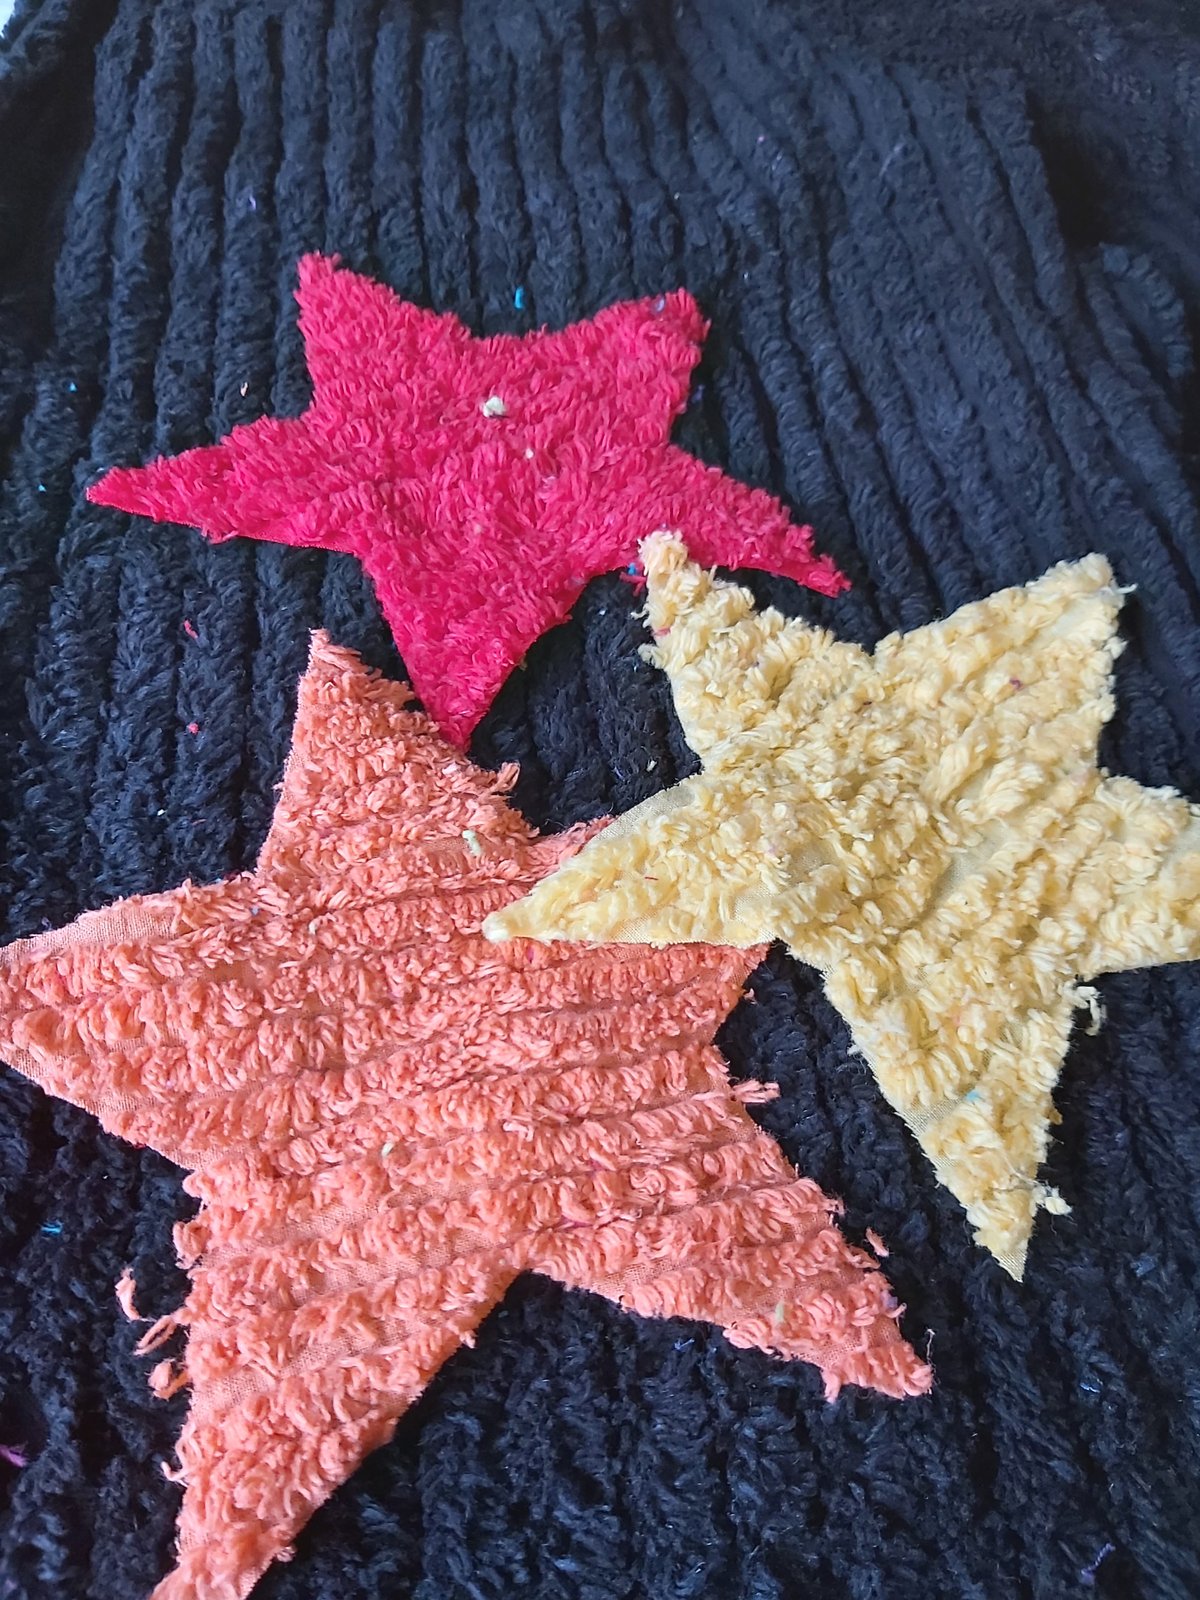 Image of Black chenille pants with orange/red/yellow stars